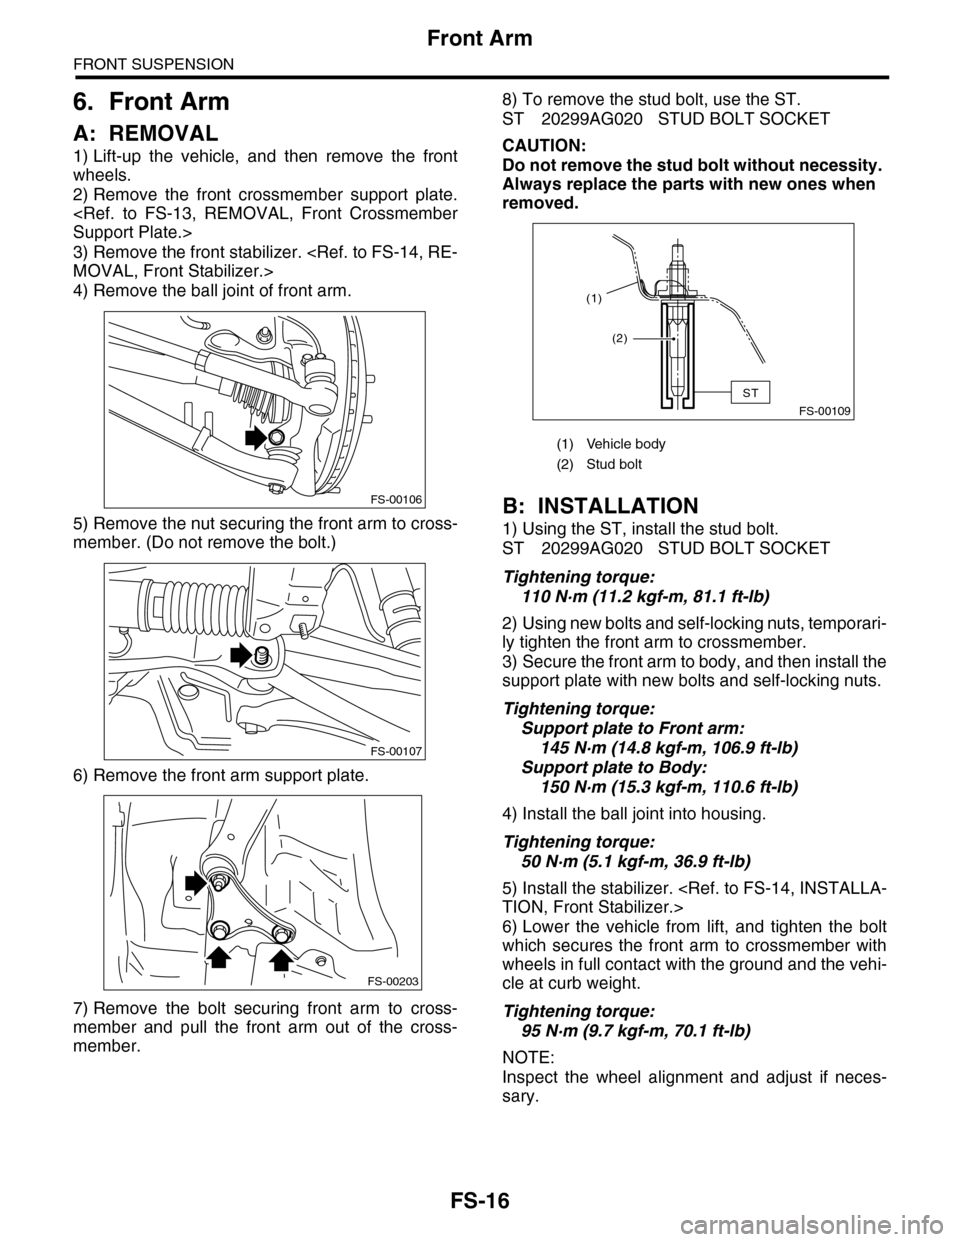 SUBARU TRIBECA 2009 1.G Service Workshop Manual FS-16
Front Arm
FRONT SUSPENSION
6. Front Arm
A: REMOVAL
1) Lift-up  the  vehicle,  and  then  remove  the  front
wheels.
2) Remove  the  front  crossmember  support  plate.
<Ref.  to  FS-13,  REMOVAL